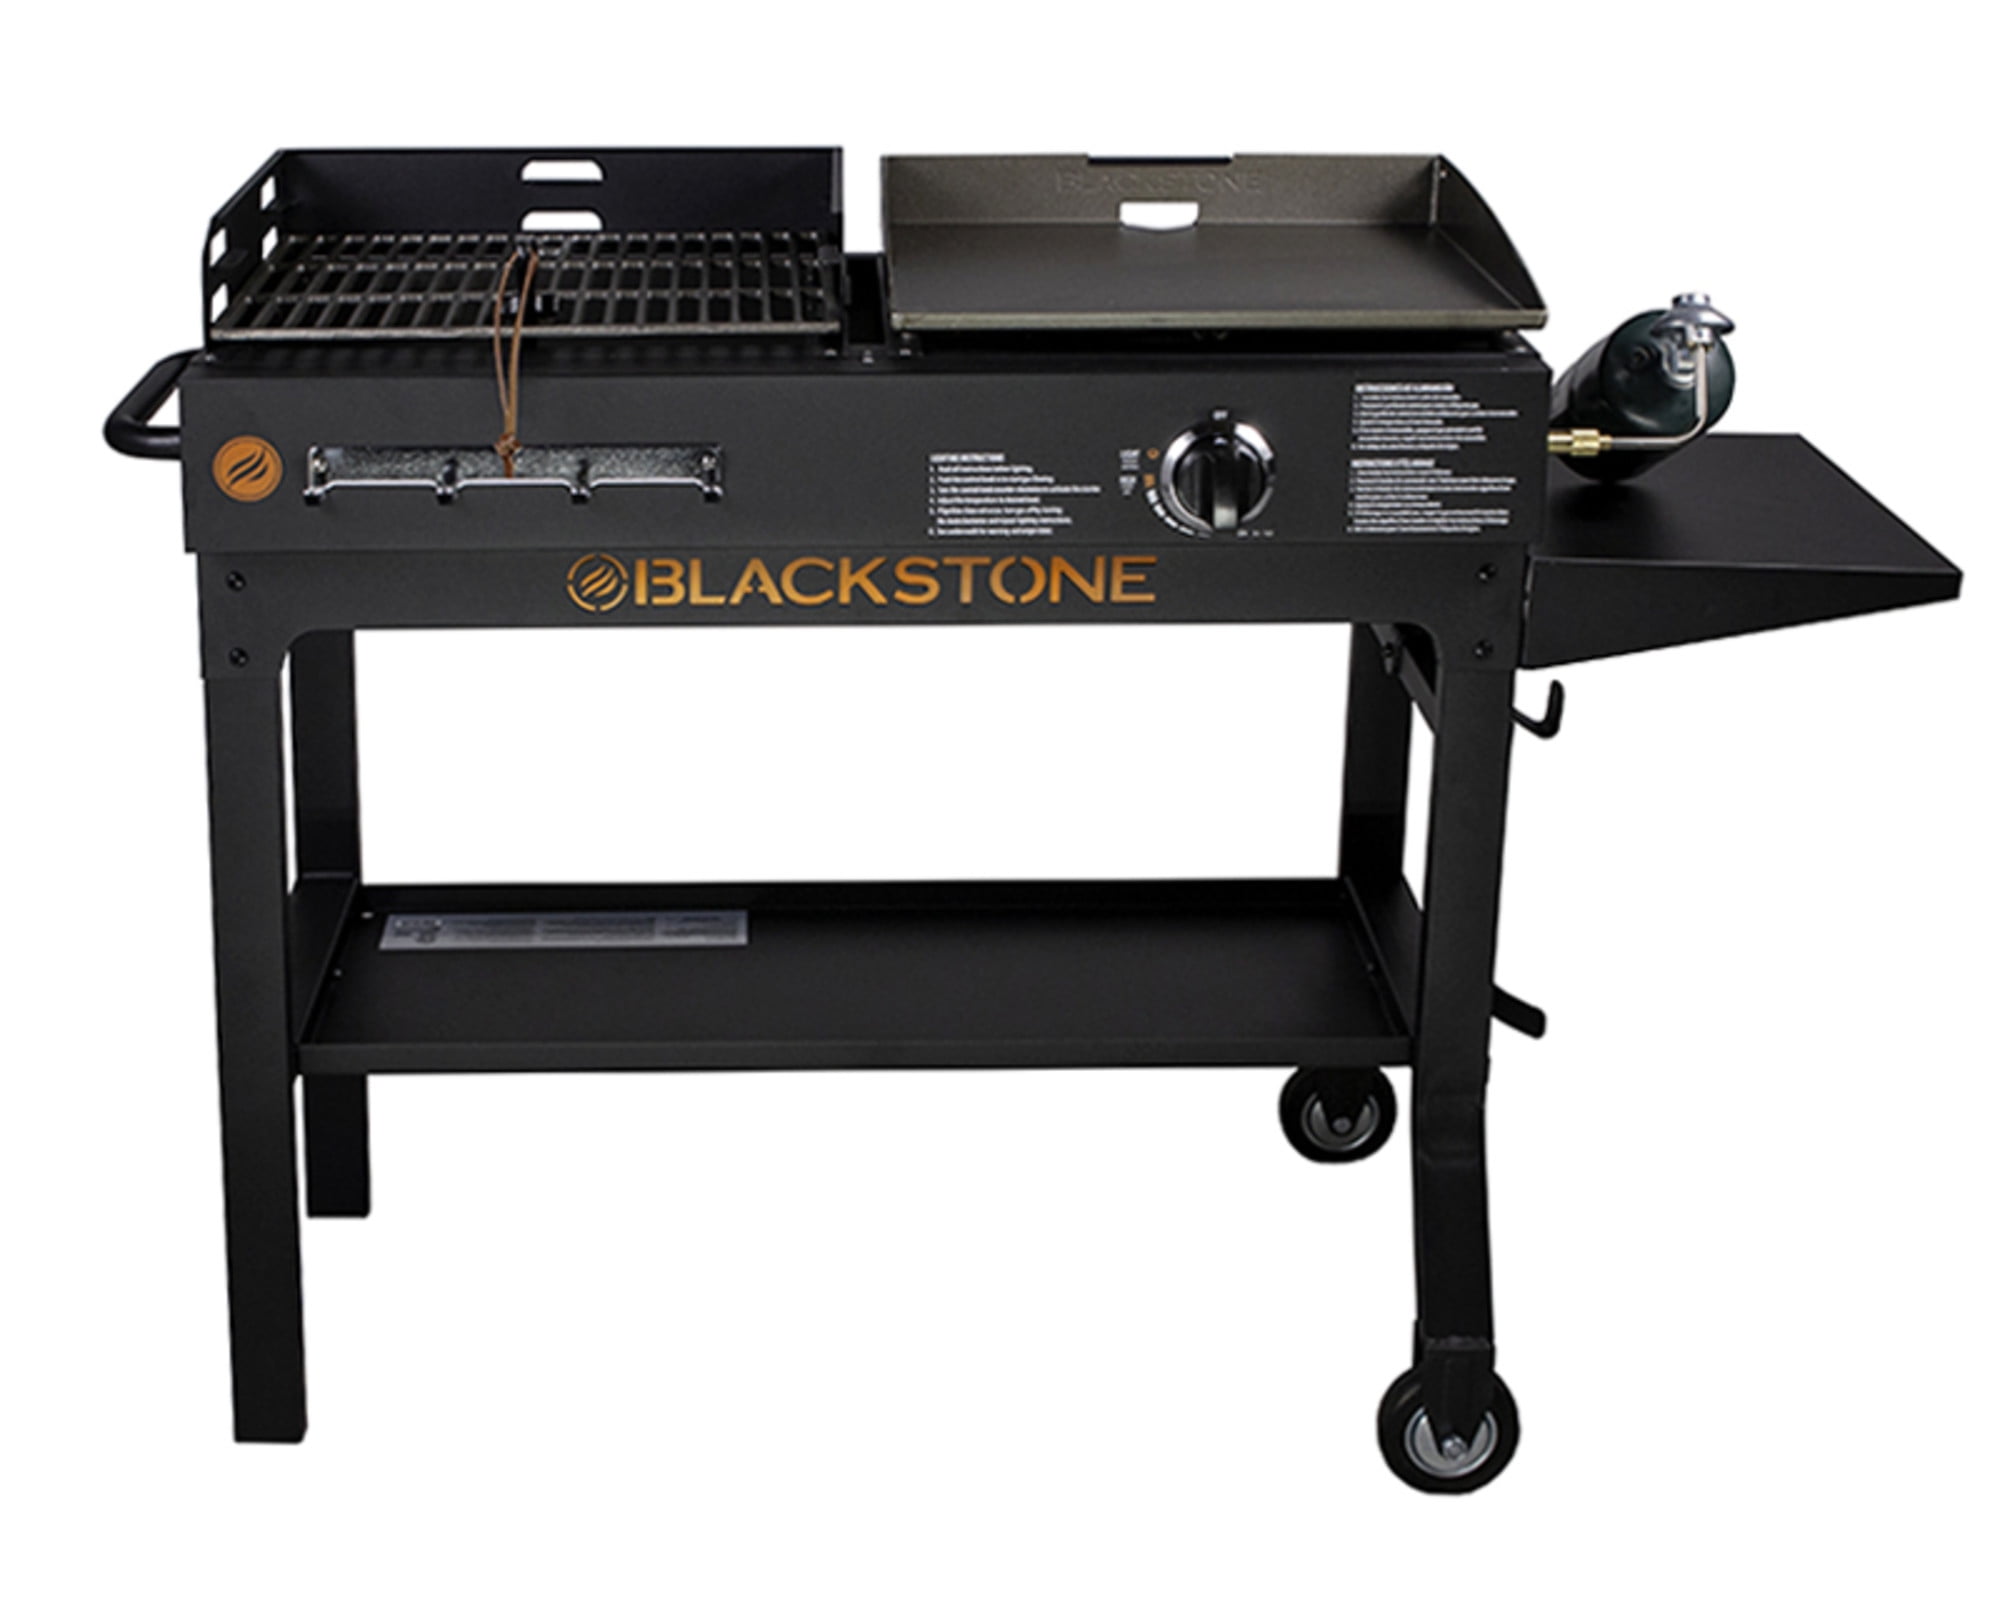 17 Griddle And Charcoal Grill Combo, Blackstone Liquid Propane Freestanding Outdoor Griddle With Lid